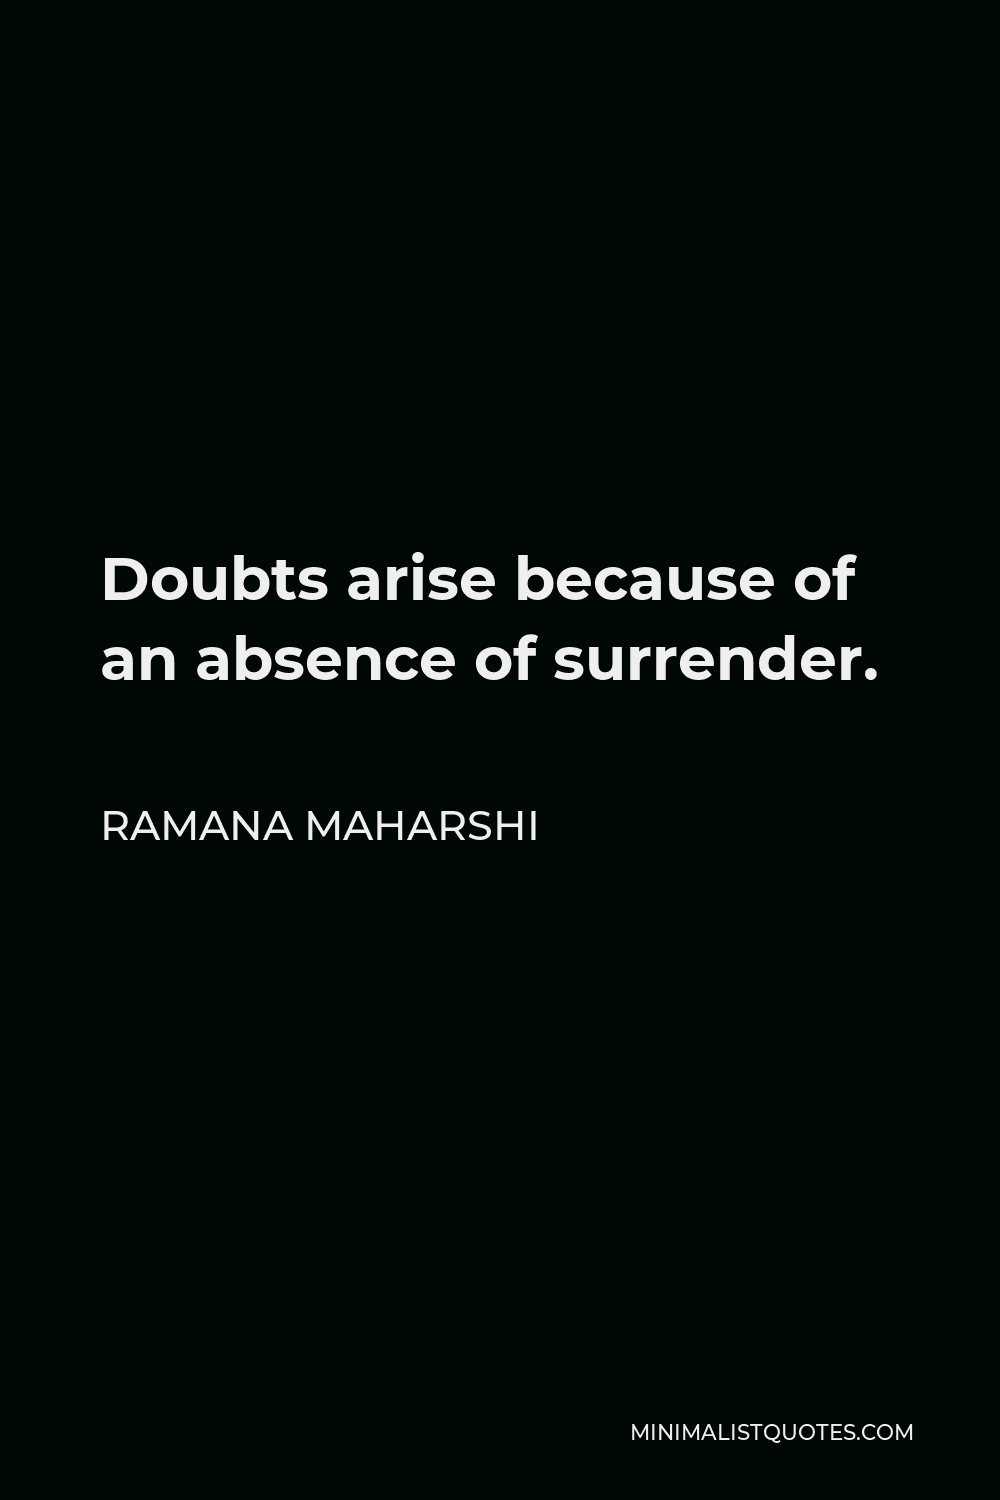 Ramana Maharshi Quote - Doubts arise because of an absence of surrender.